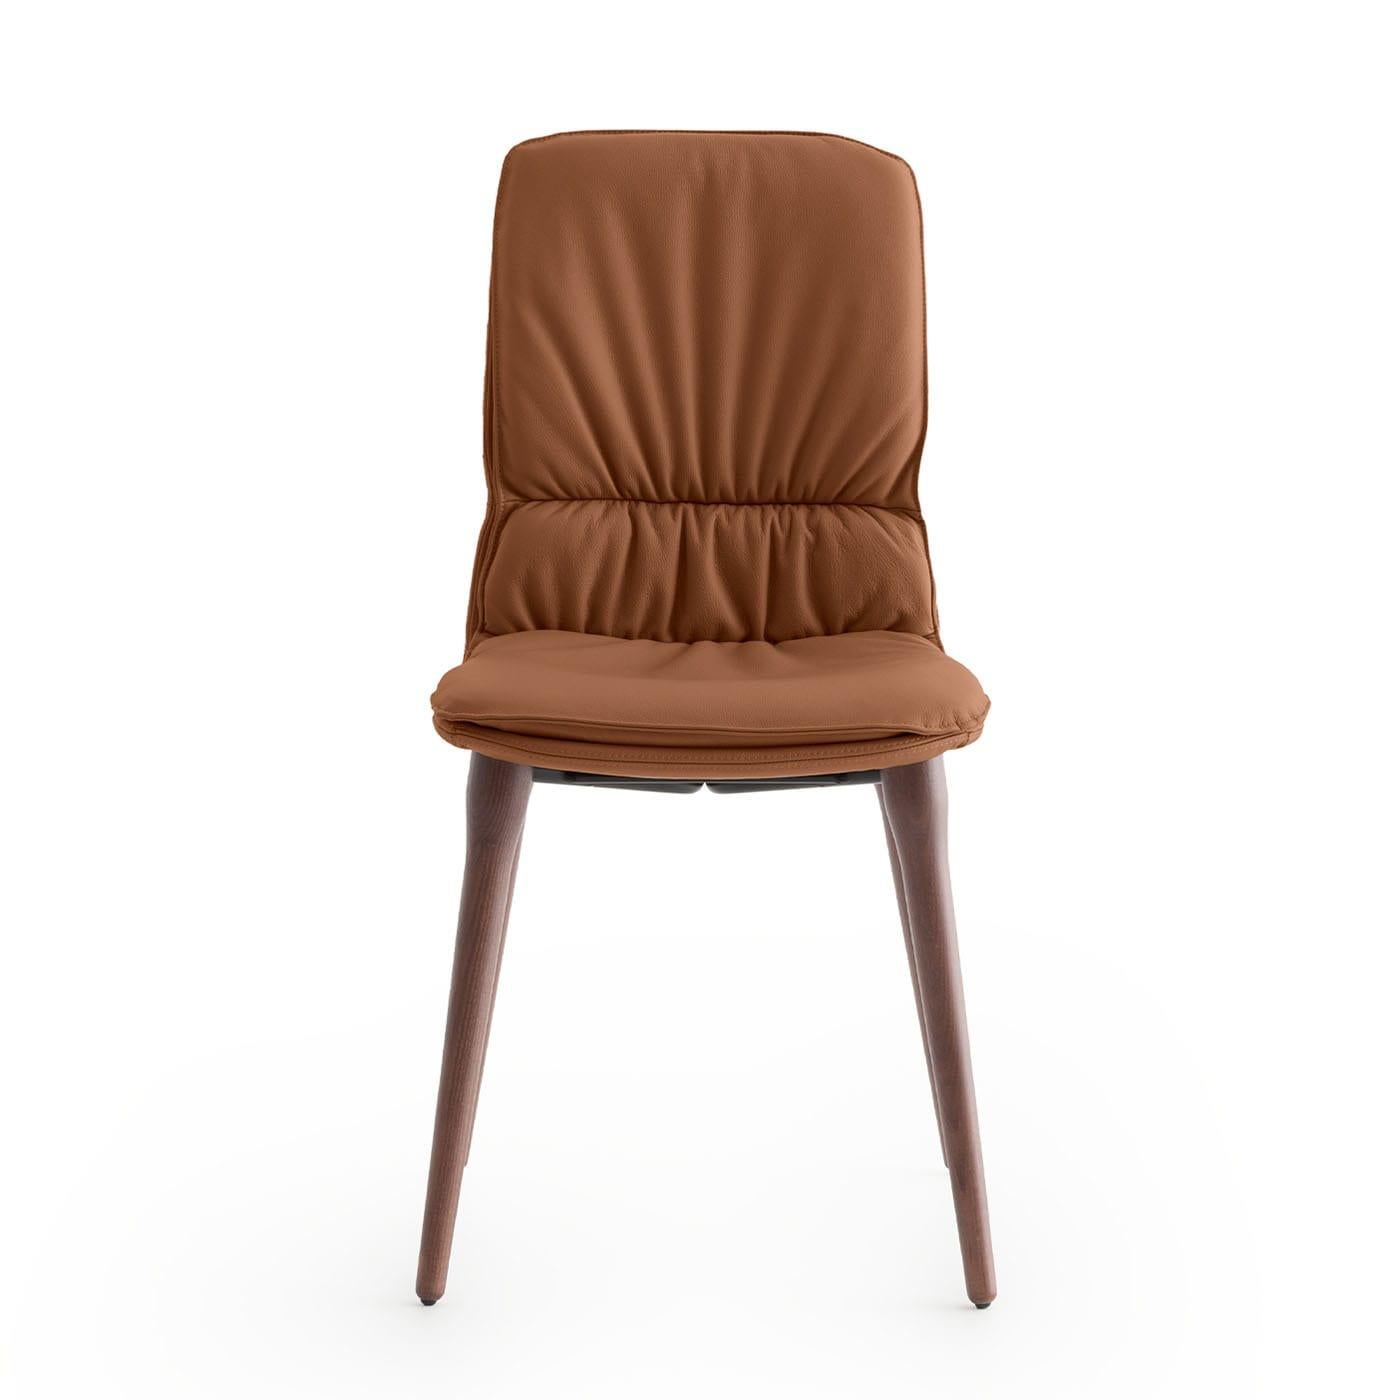 A sleek thermo-formed MDF shell sustained by tapered walnut-stained ash legs lends this chair its unmistakable modern character. Outstandingly luxurious yet restrained, it flaunts a precious cognac-hued leather cover - enriched with ripples in the